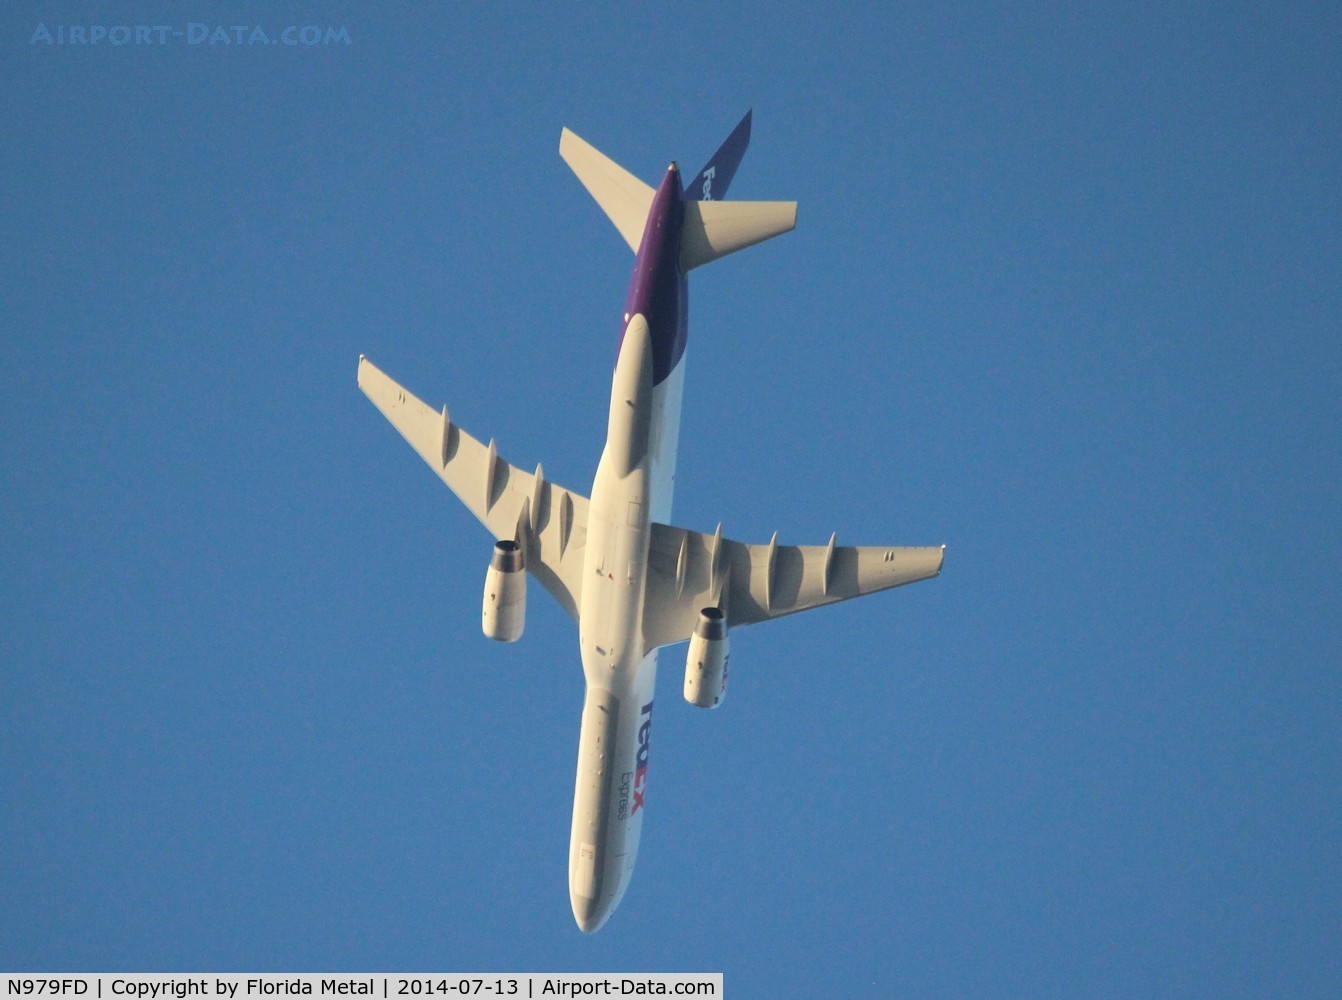 N979FD, 1992 Boeing 757-236/SF C/N 25592, Fed Ex 7,000 ft over Livonia Michigan on way to Detroit inbound from Memphis